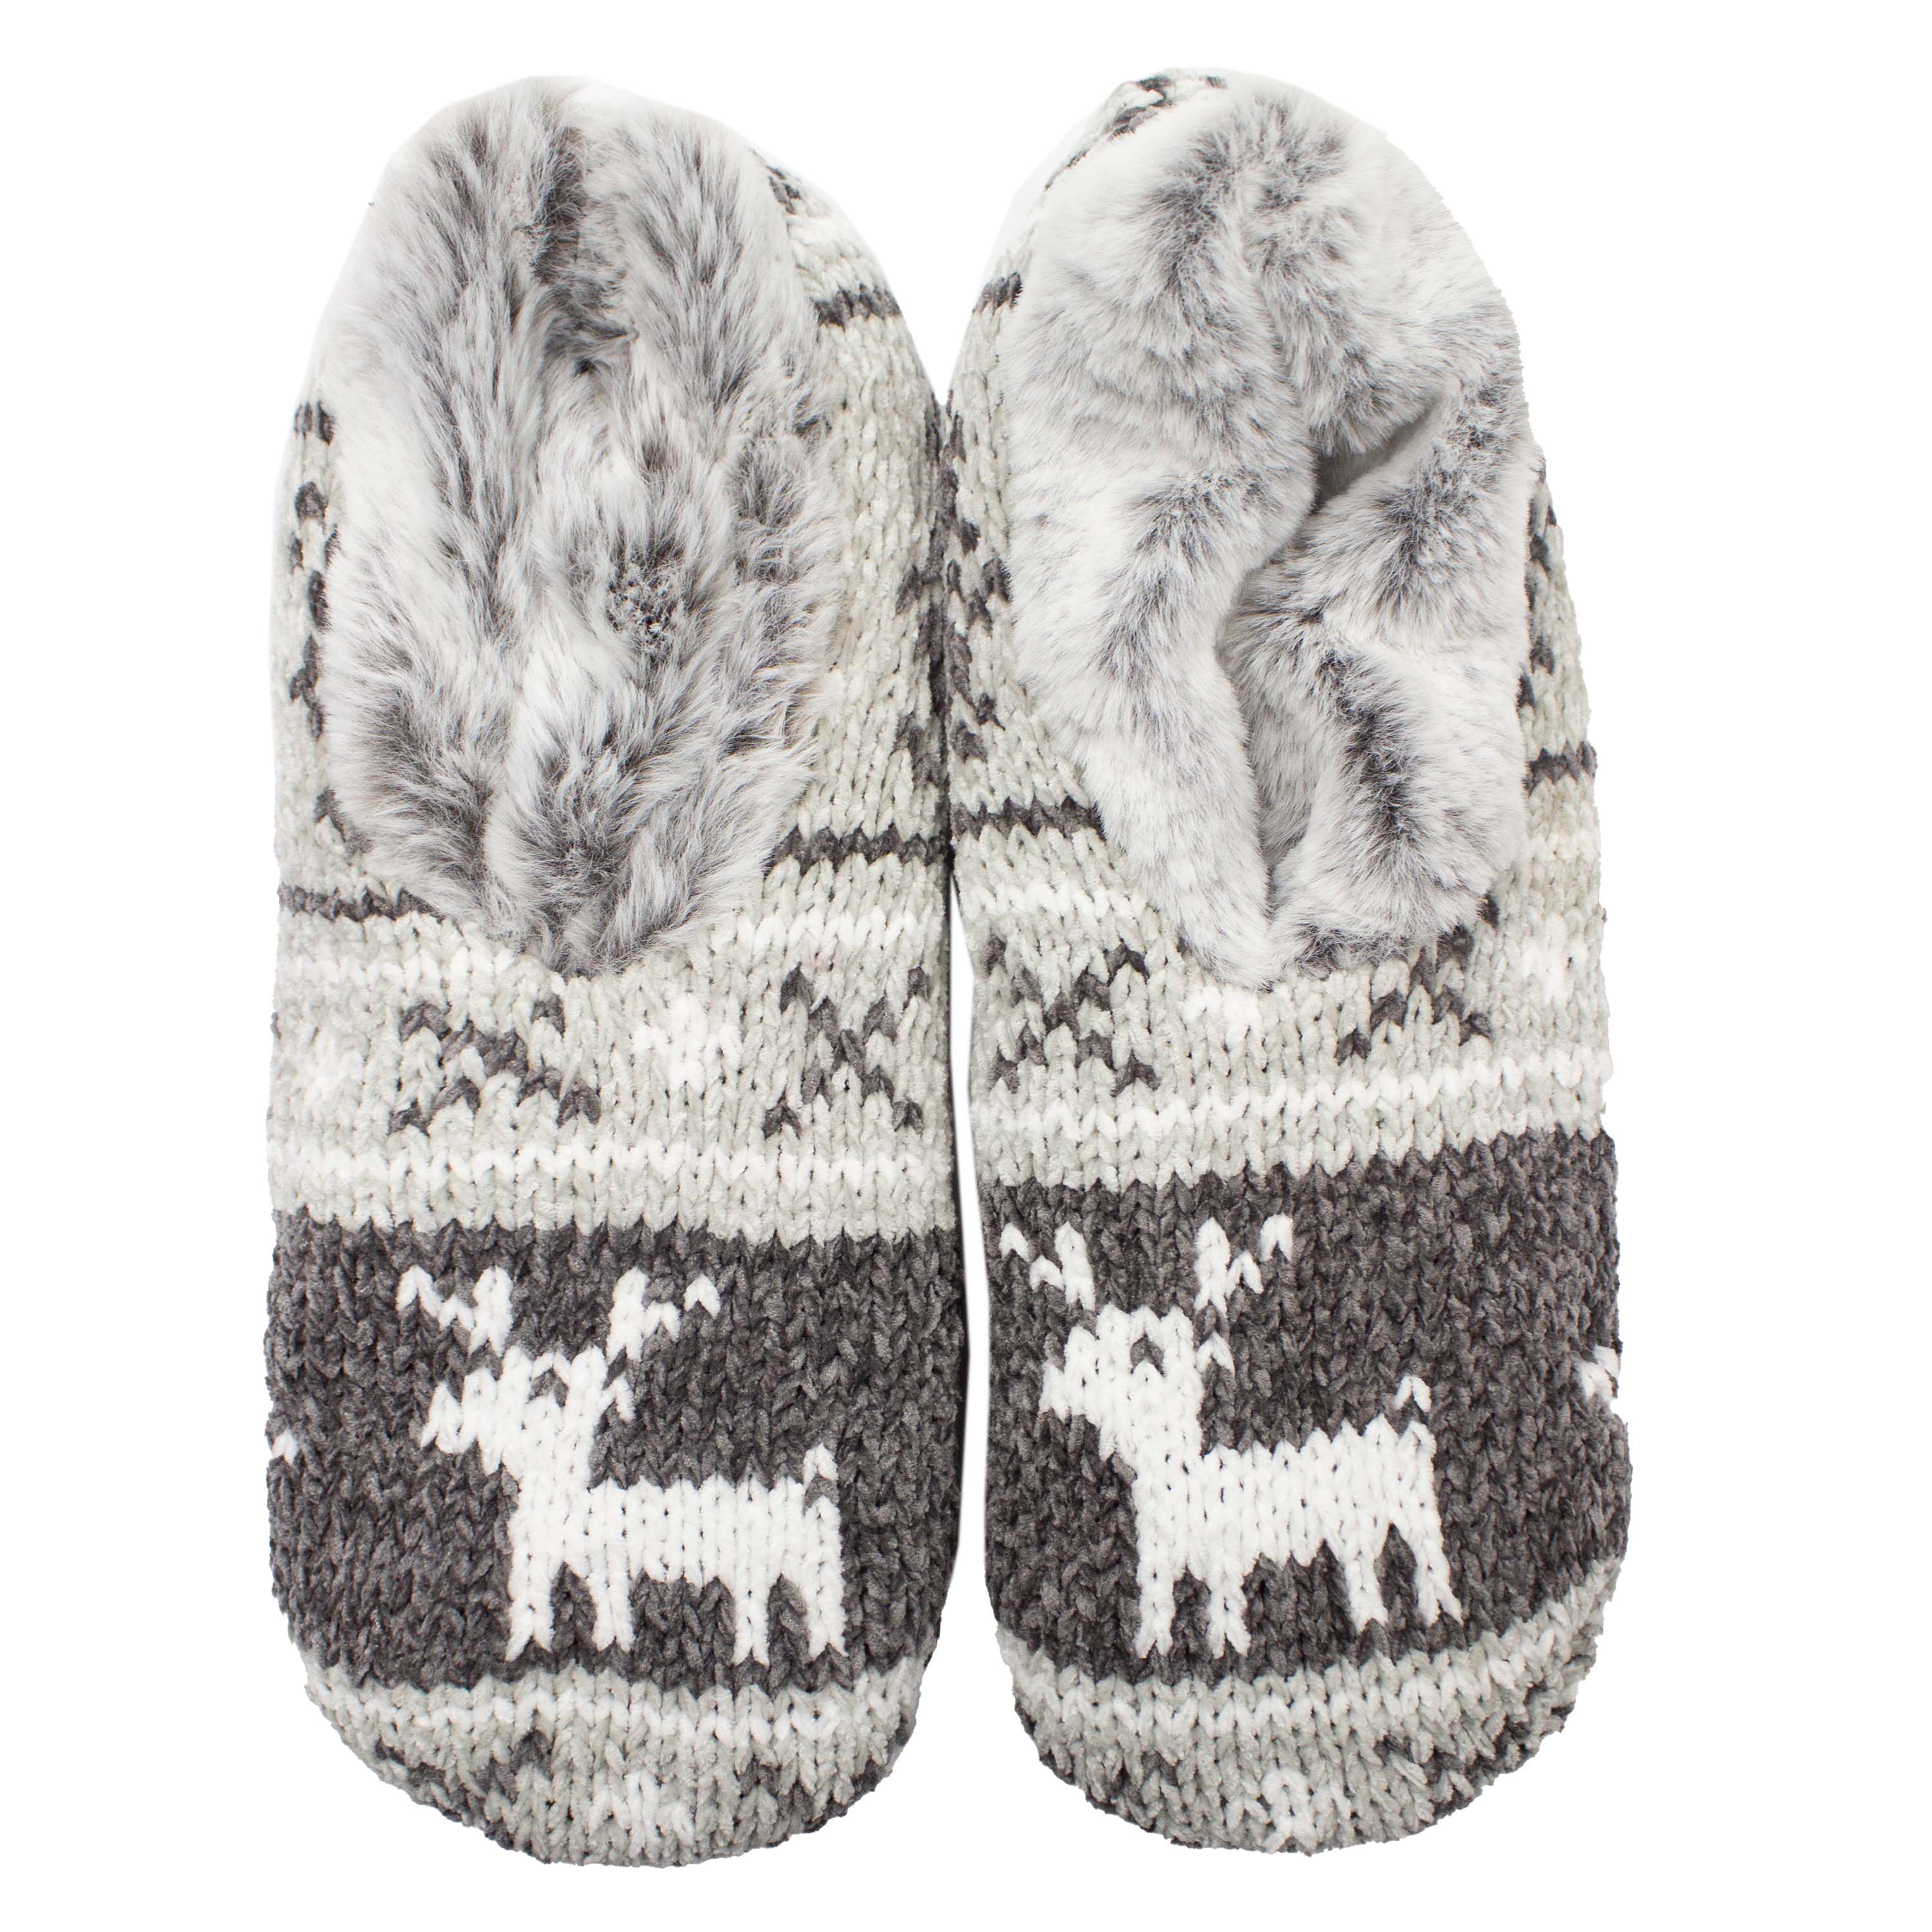 Neroli and shae butter infused faux fur slipper- gray